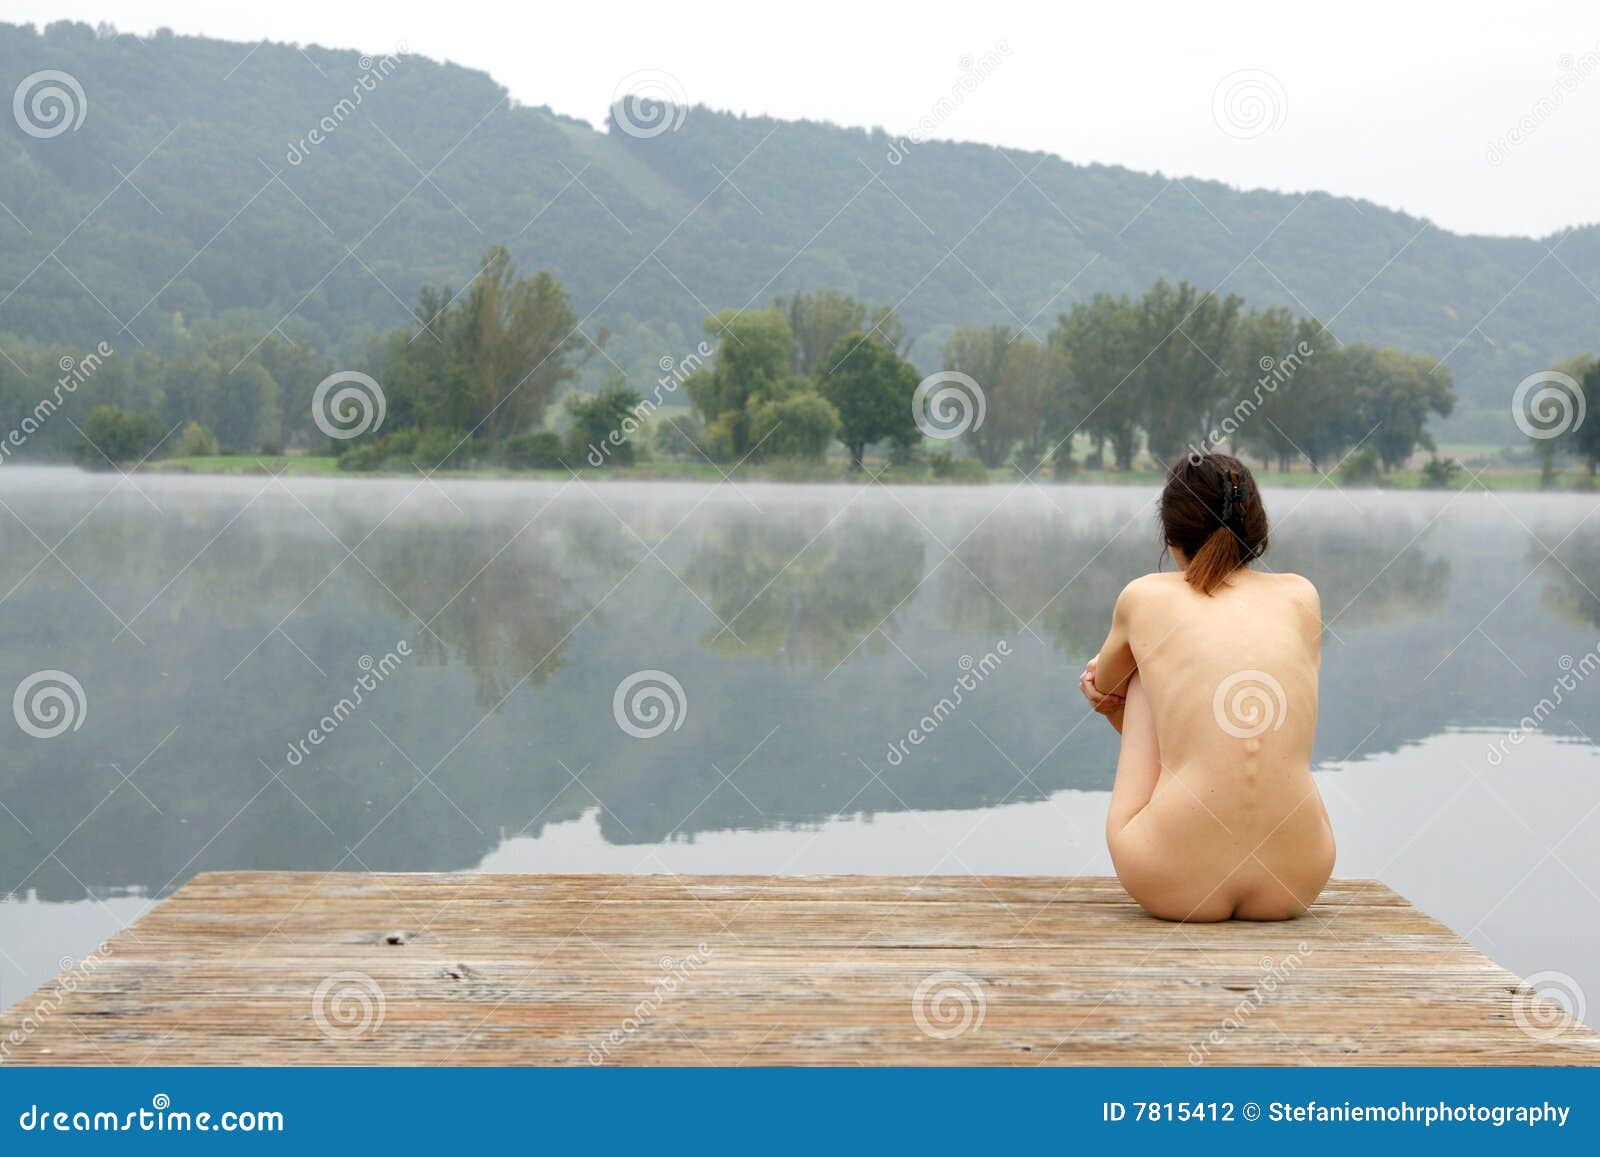 Lake the nude by 